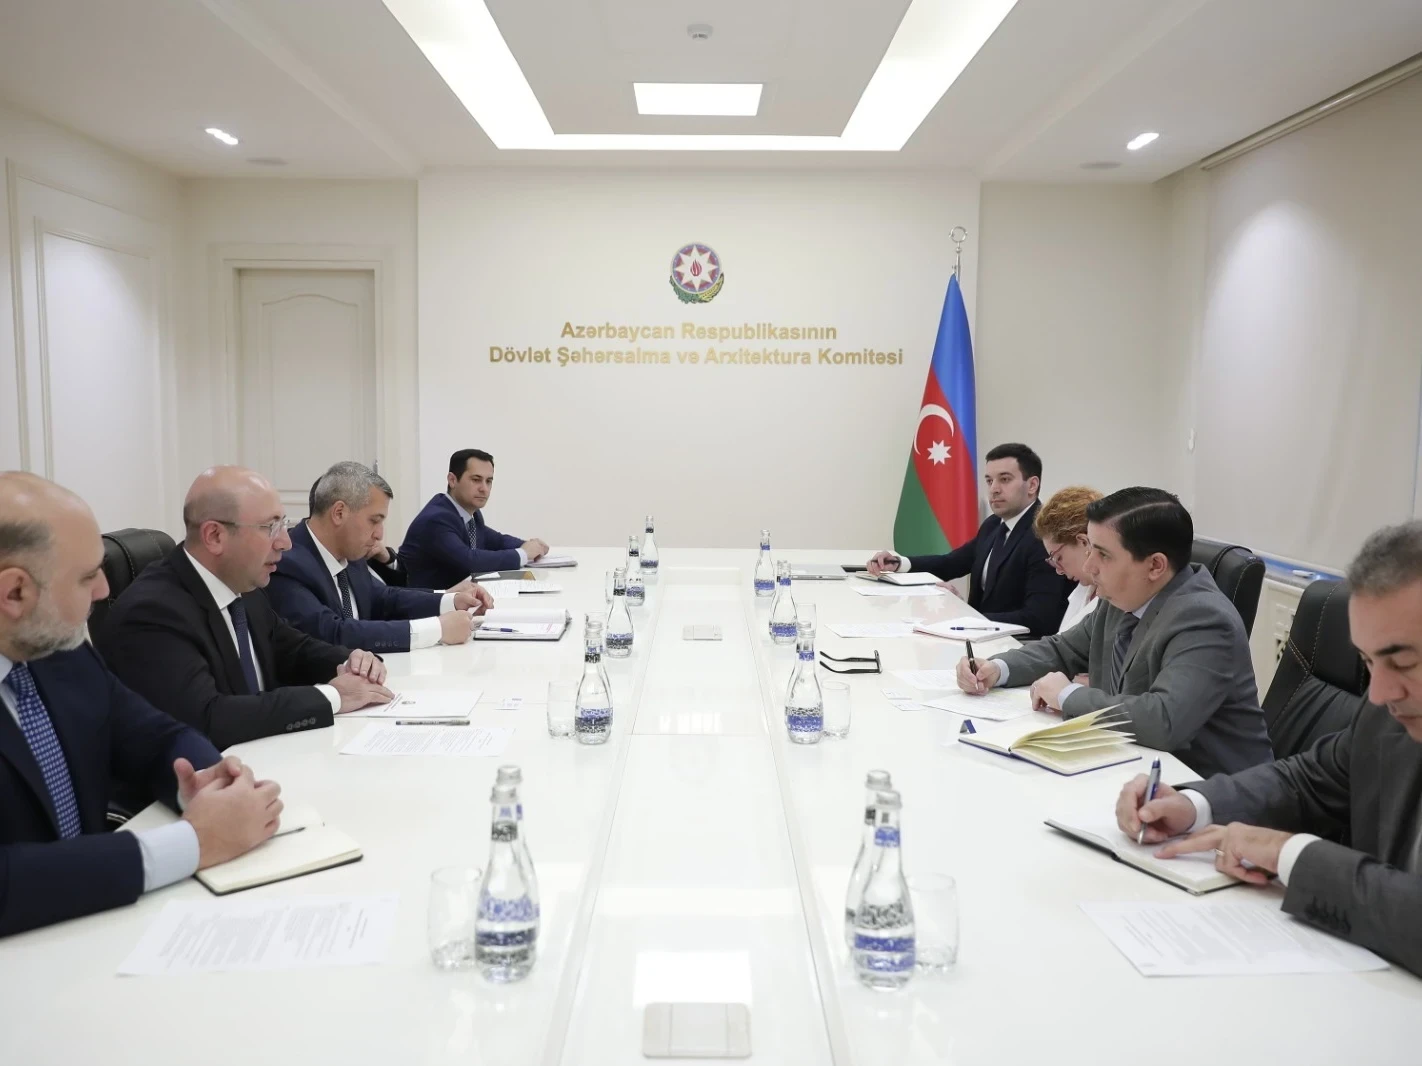 Chairman of the State Committee on Urban Planning and Architecture received Nuno Queiros, acting Resident Representative of the UN Development Program in Azerbaijan